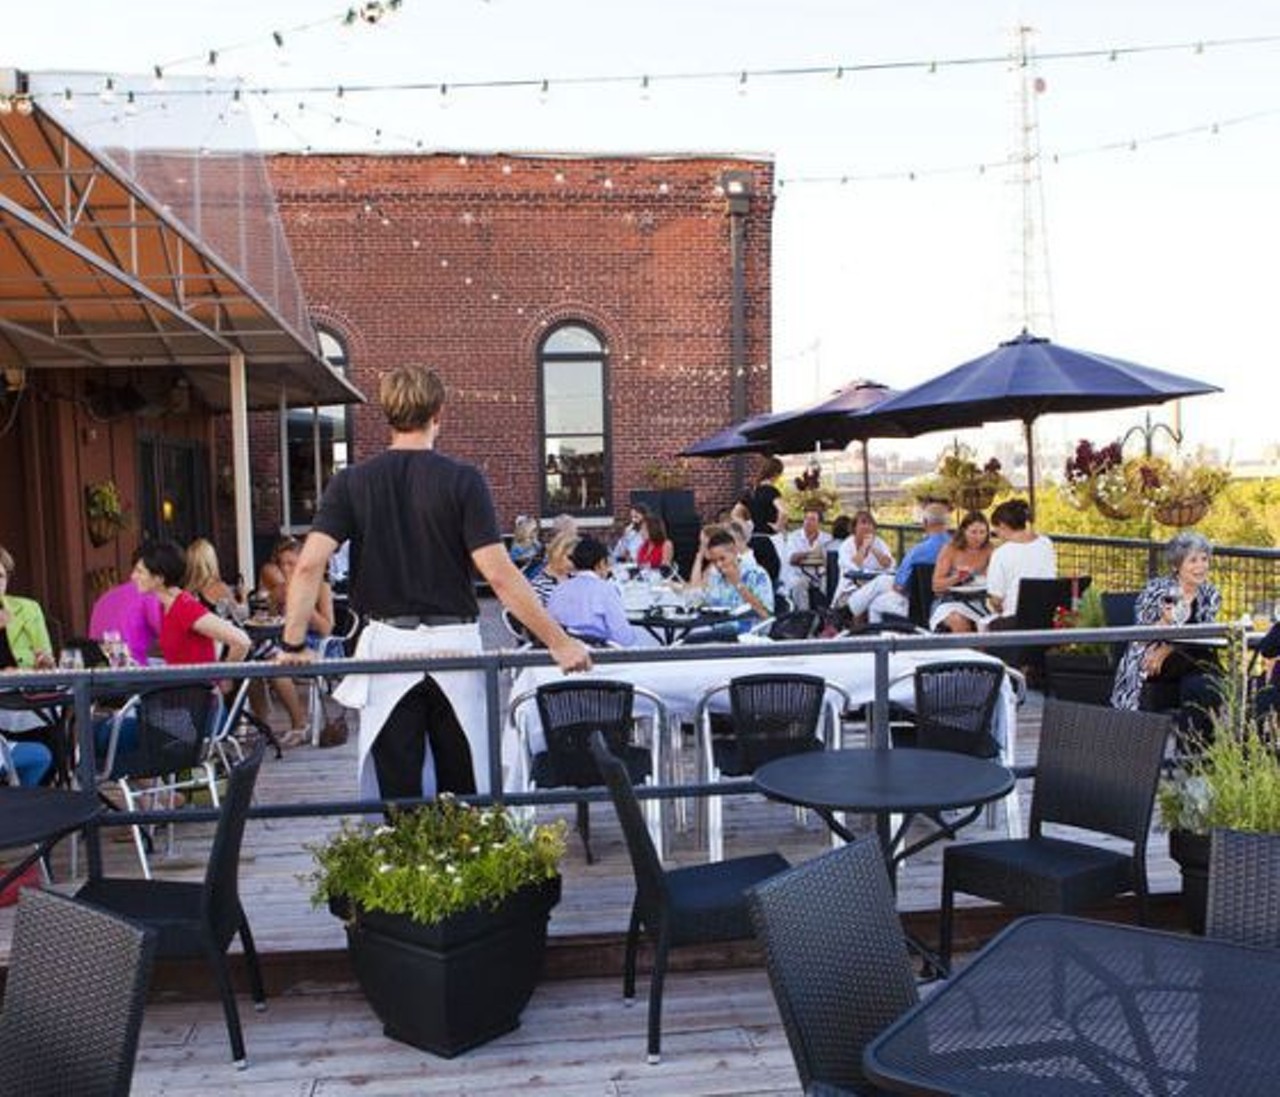 When You&#146;re Craving Fresh Air &#151; and a Room with a View: Vin de Set
Few brunches in the city are perpetually as packed as the one at Vin de Set (2017 Chouteau, 314-241-8989), and there&#146;s a simple reason for that: The rooftop patio has a view &#151; and a vibe &#151; worth getting up for. Look out over Lafayette Square and the Arch with the beautiful people and feel good about your life again. Oh, and don&#146;t miss that bloody mary bar. Photo by Laura Miller.